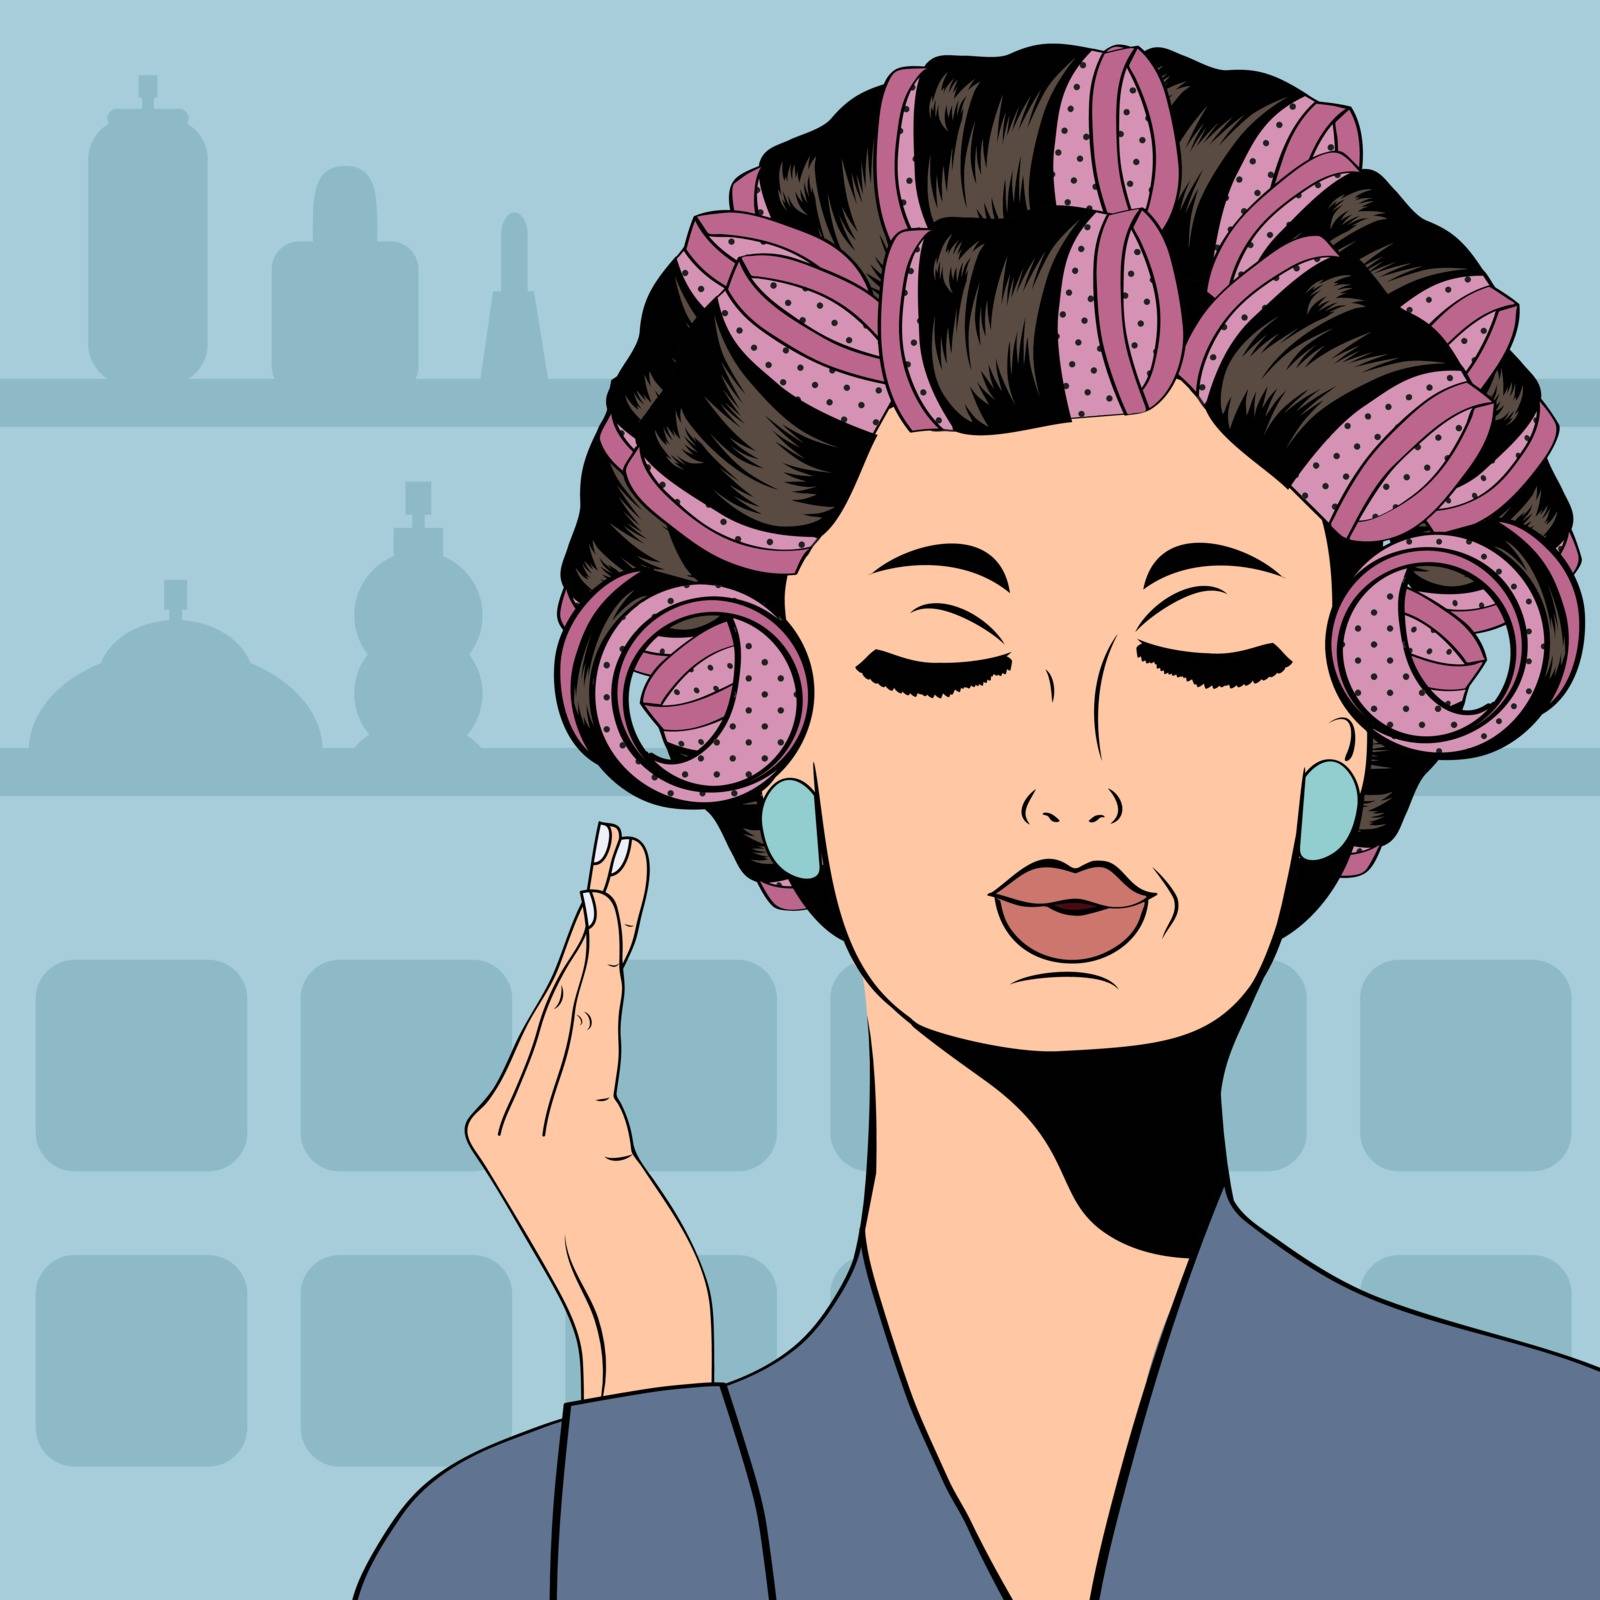 Woman with curlers in their hair, vector format